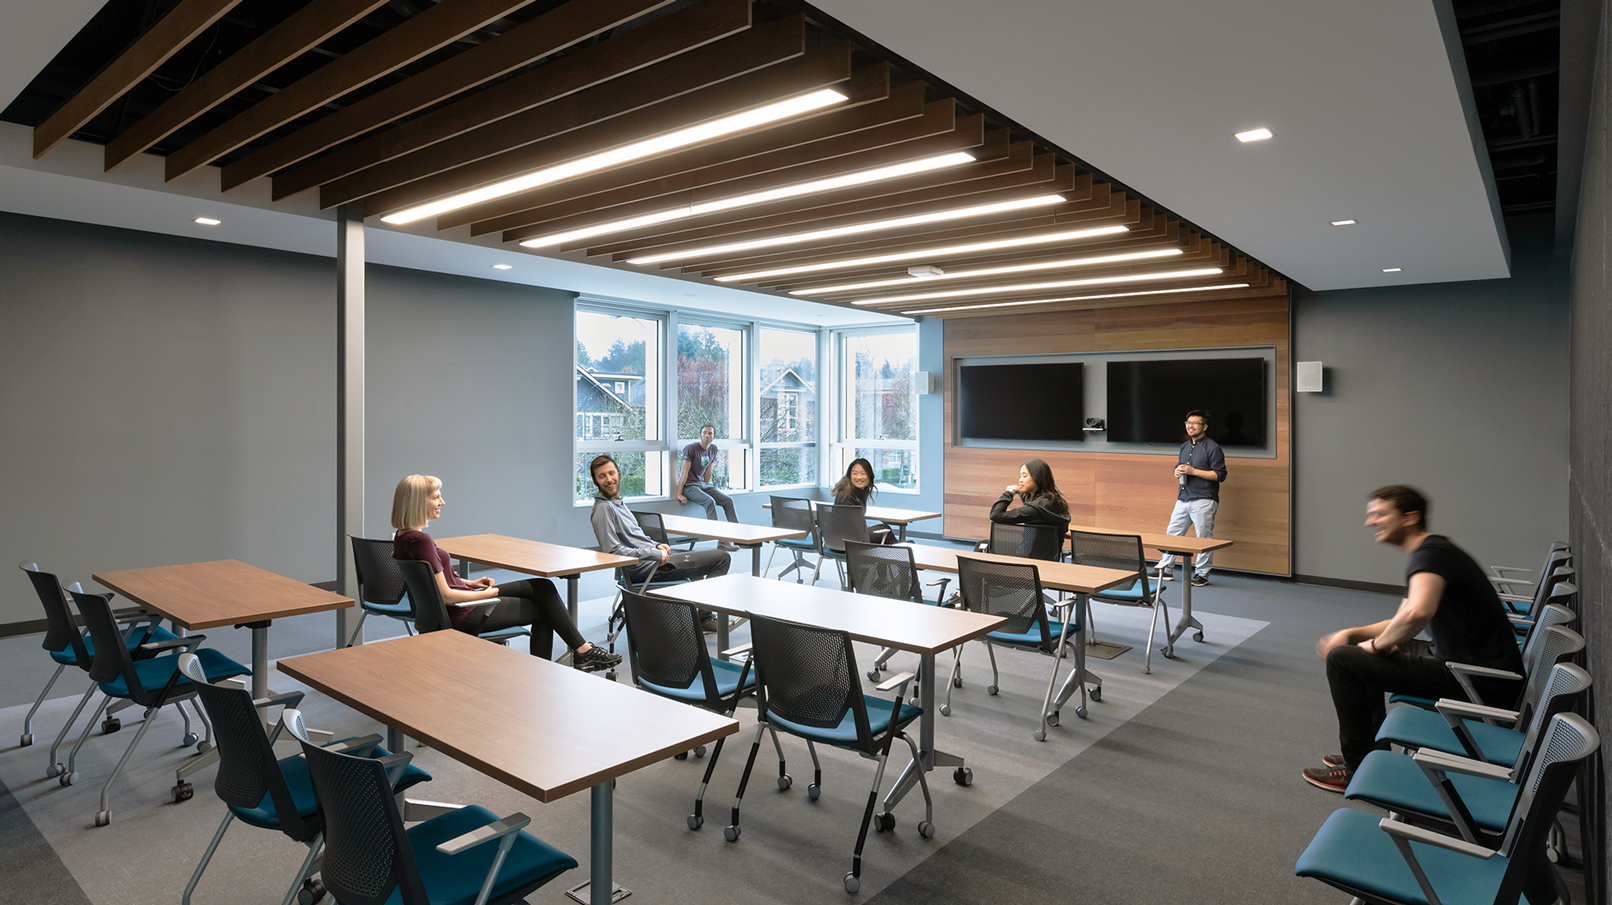 Students sit within a classroom in the pavilion. The desks and chairs all have wheels for flexibility, and there is a wood-slat feature ceiling.